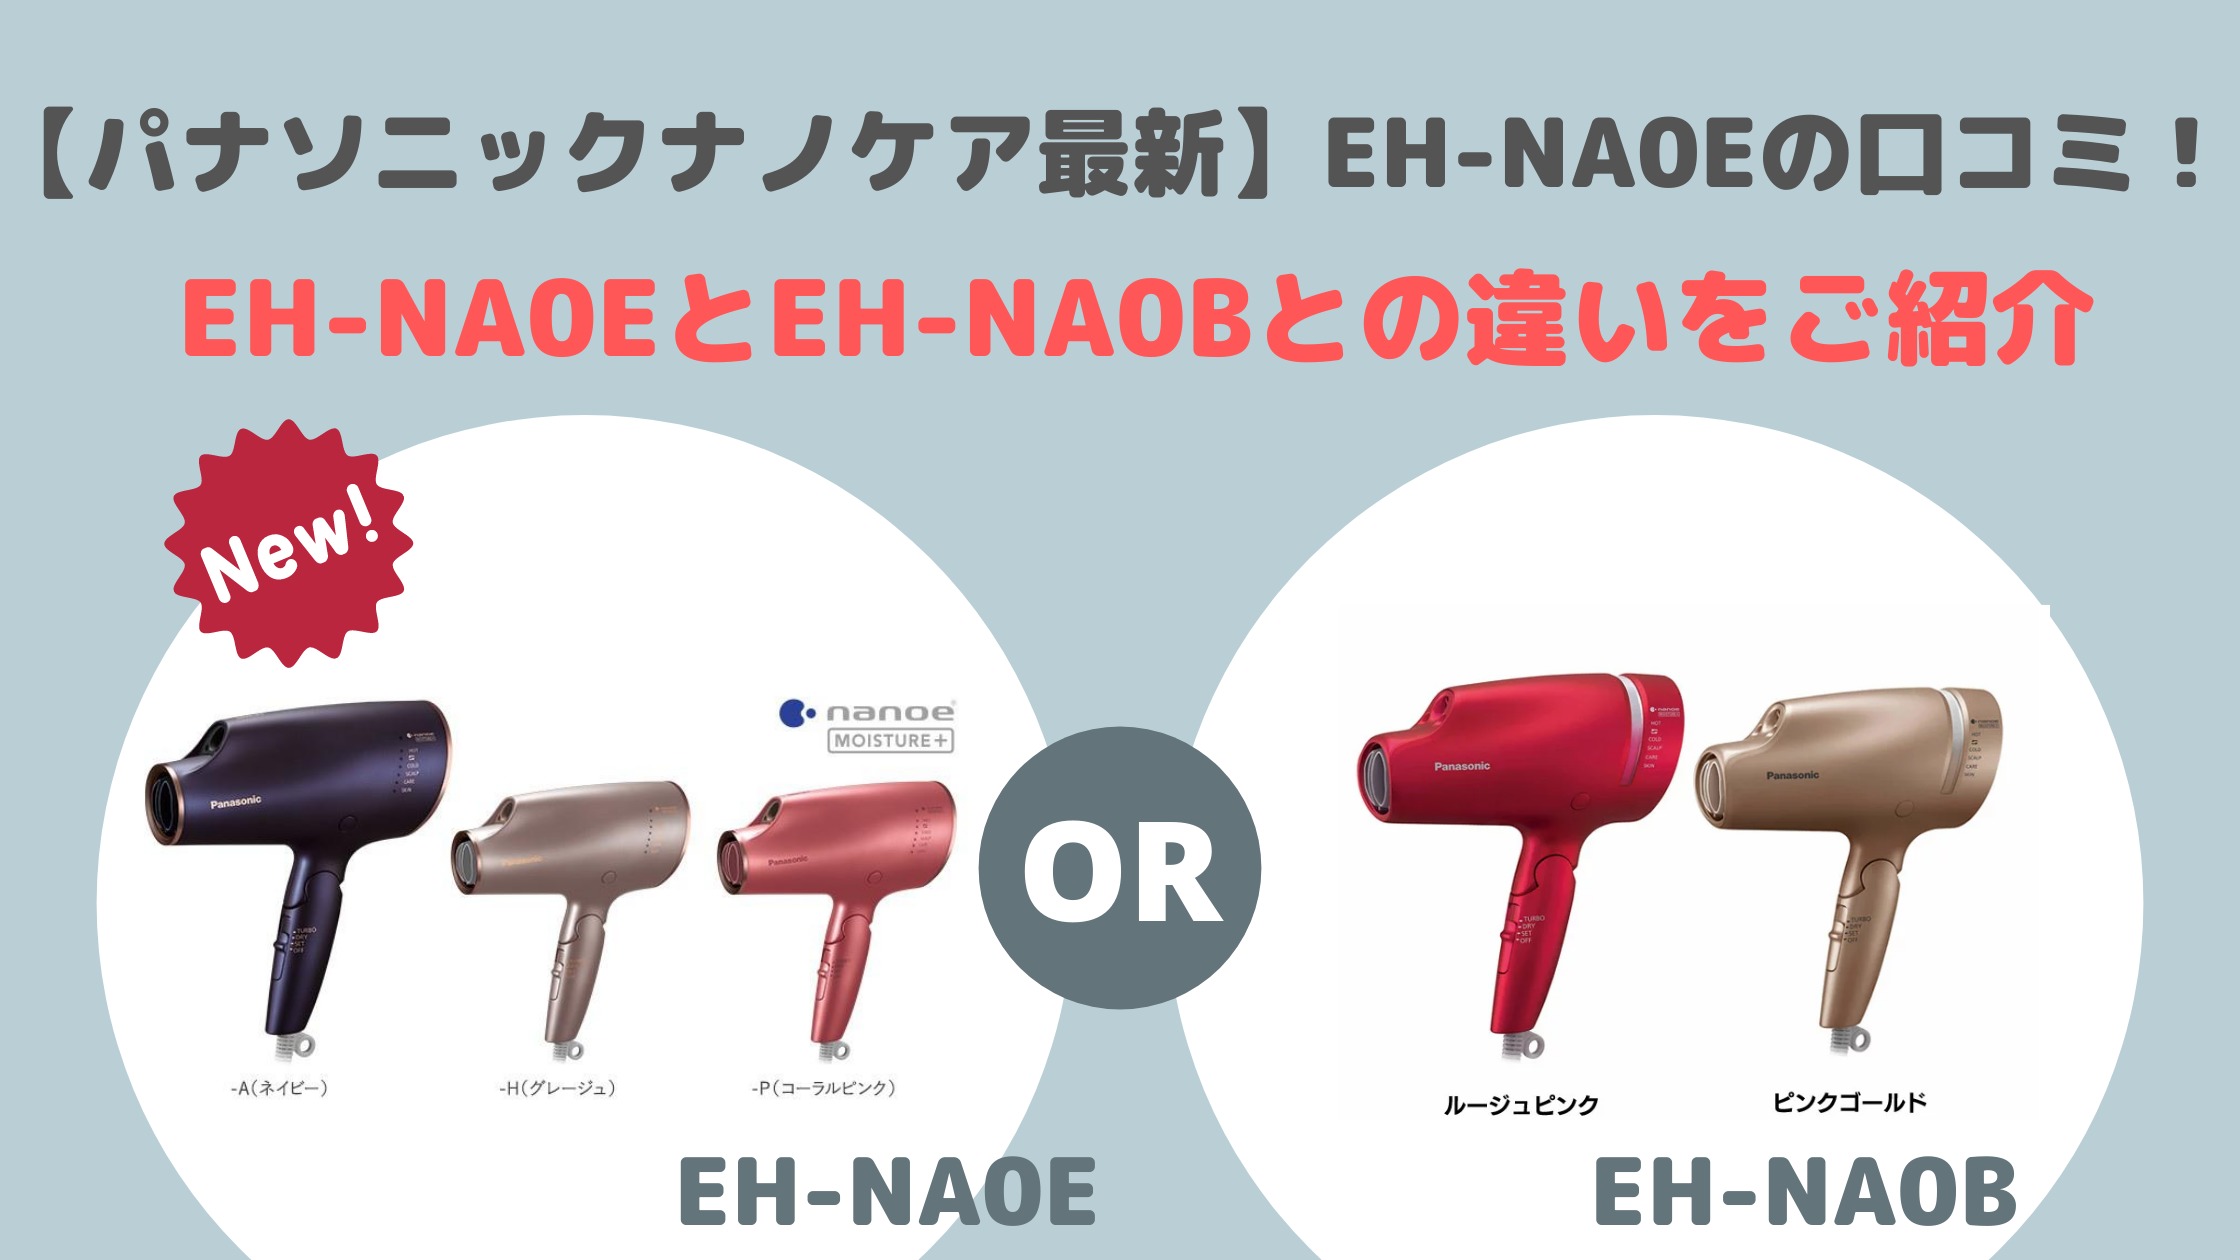 EH-NA0E口コミ！EH-NA0EとEH-NA0Bとの違いをご紹介｜パナソニック ...